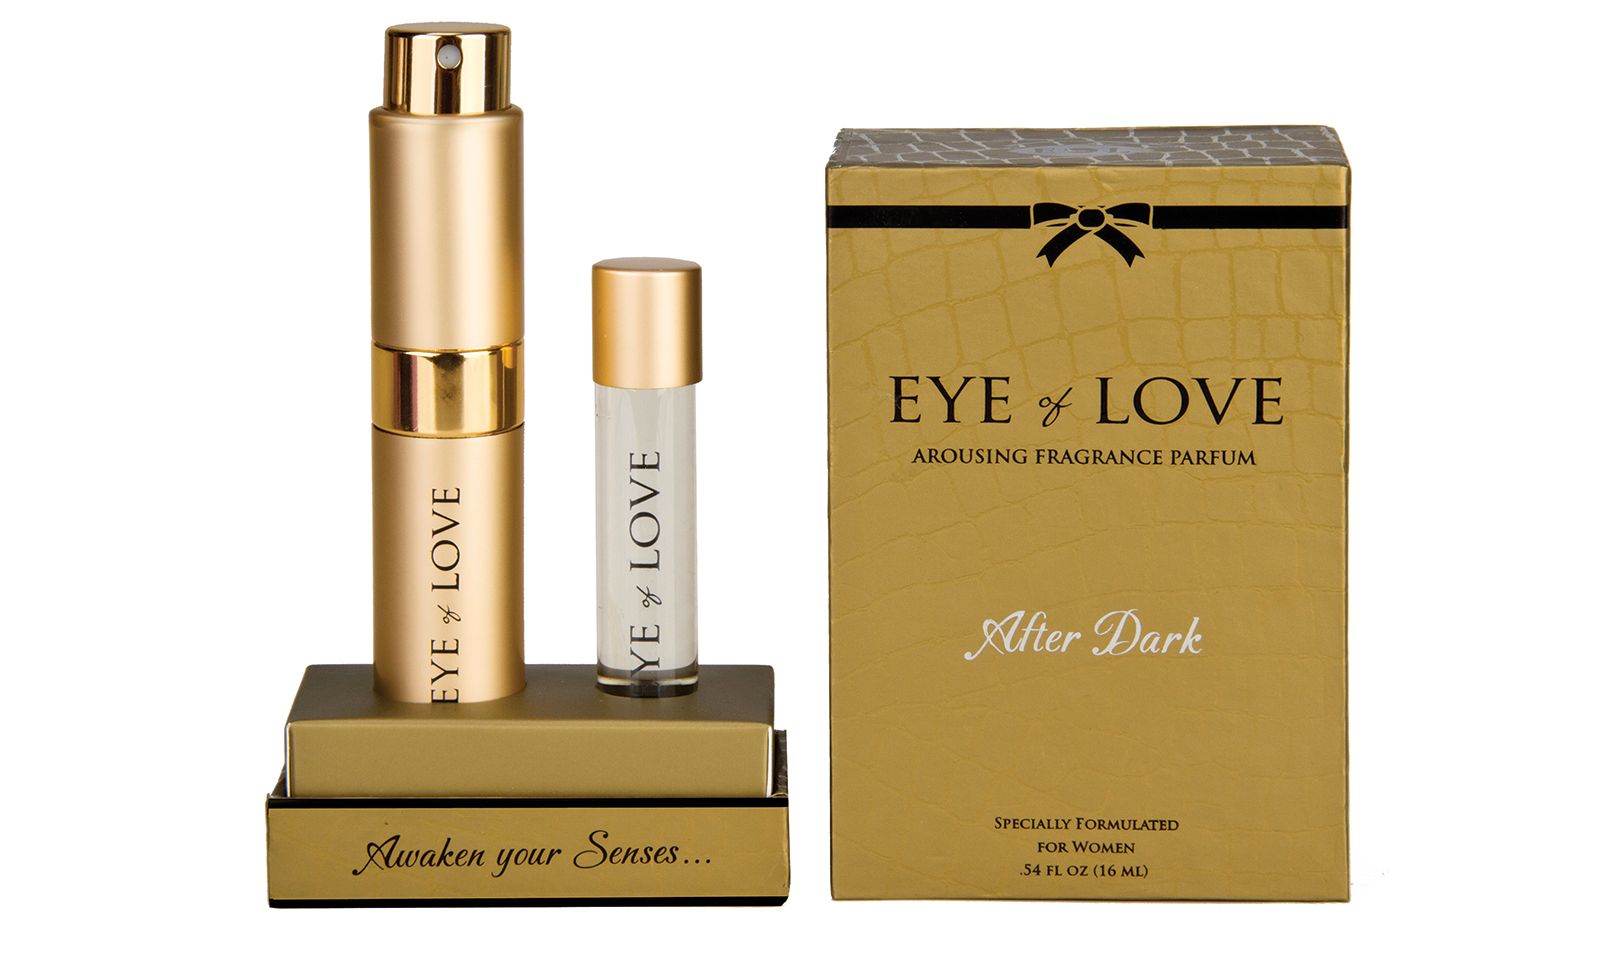 Get an Advantage With Eye of Love’s Pheromone Parfums